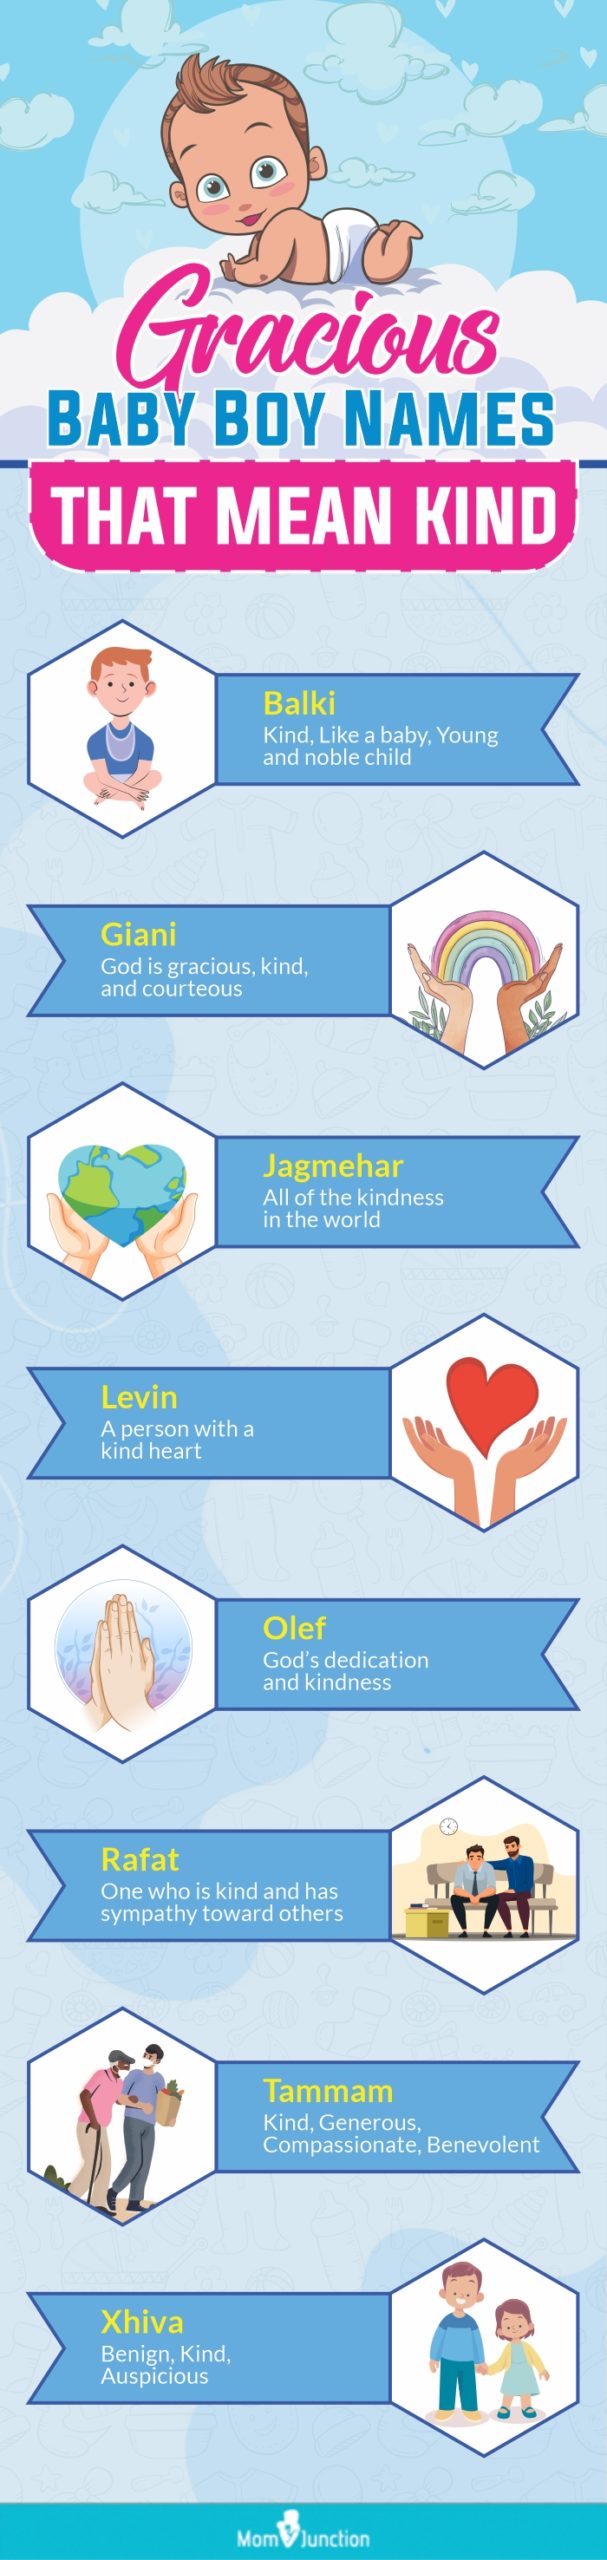 gracious baby boy names that mean kind (infographic)